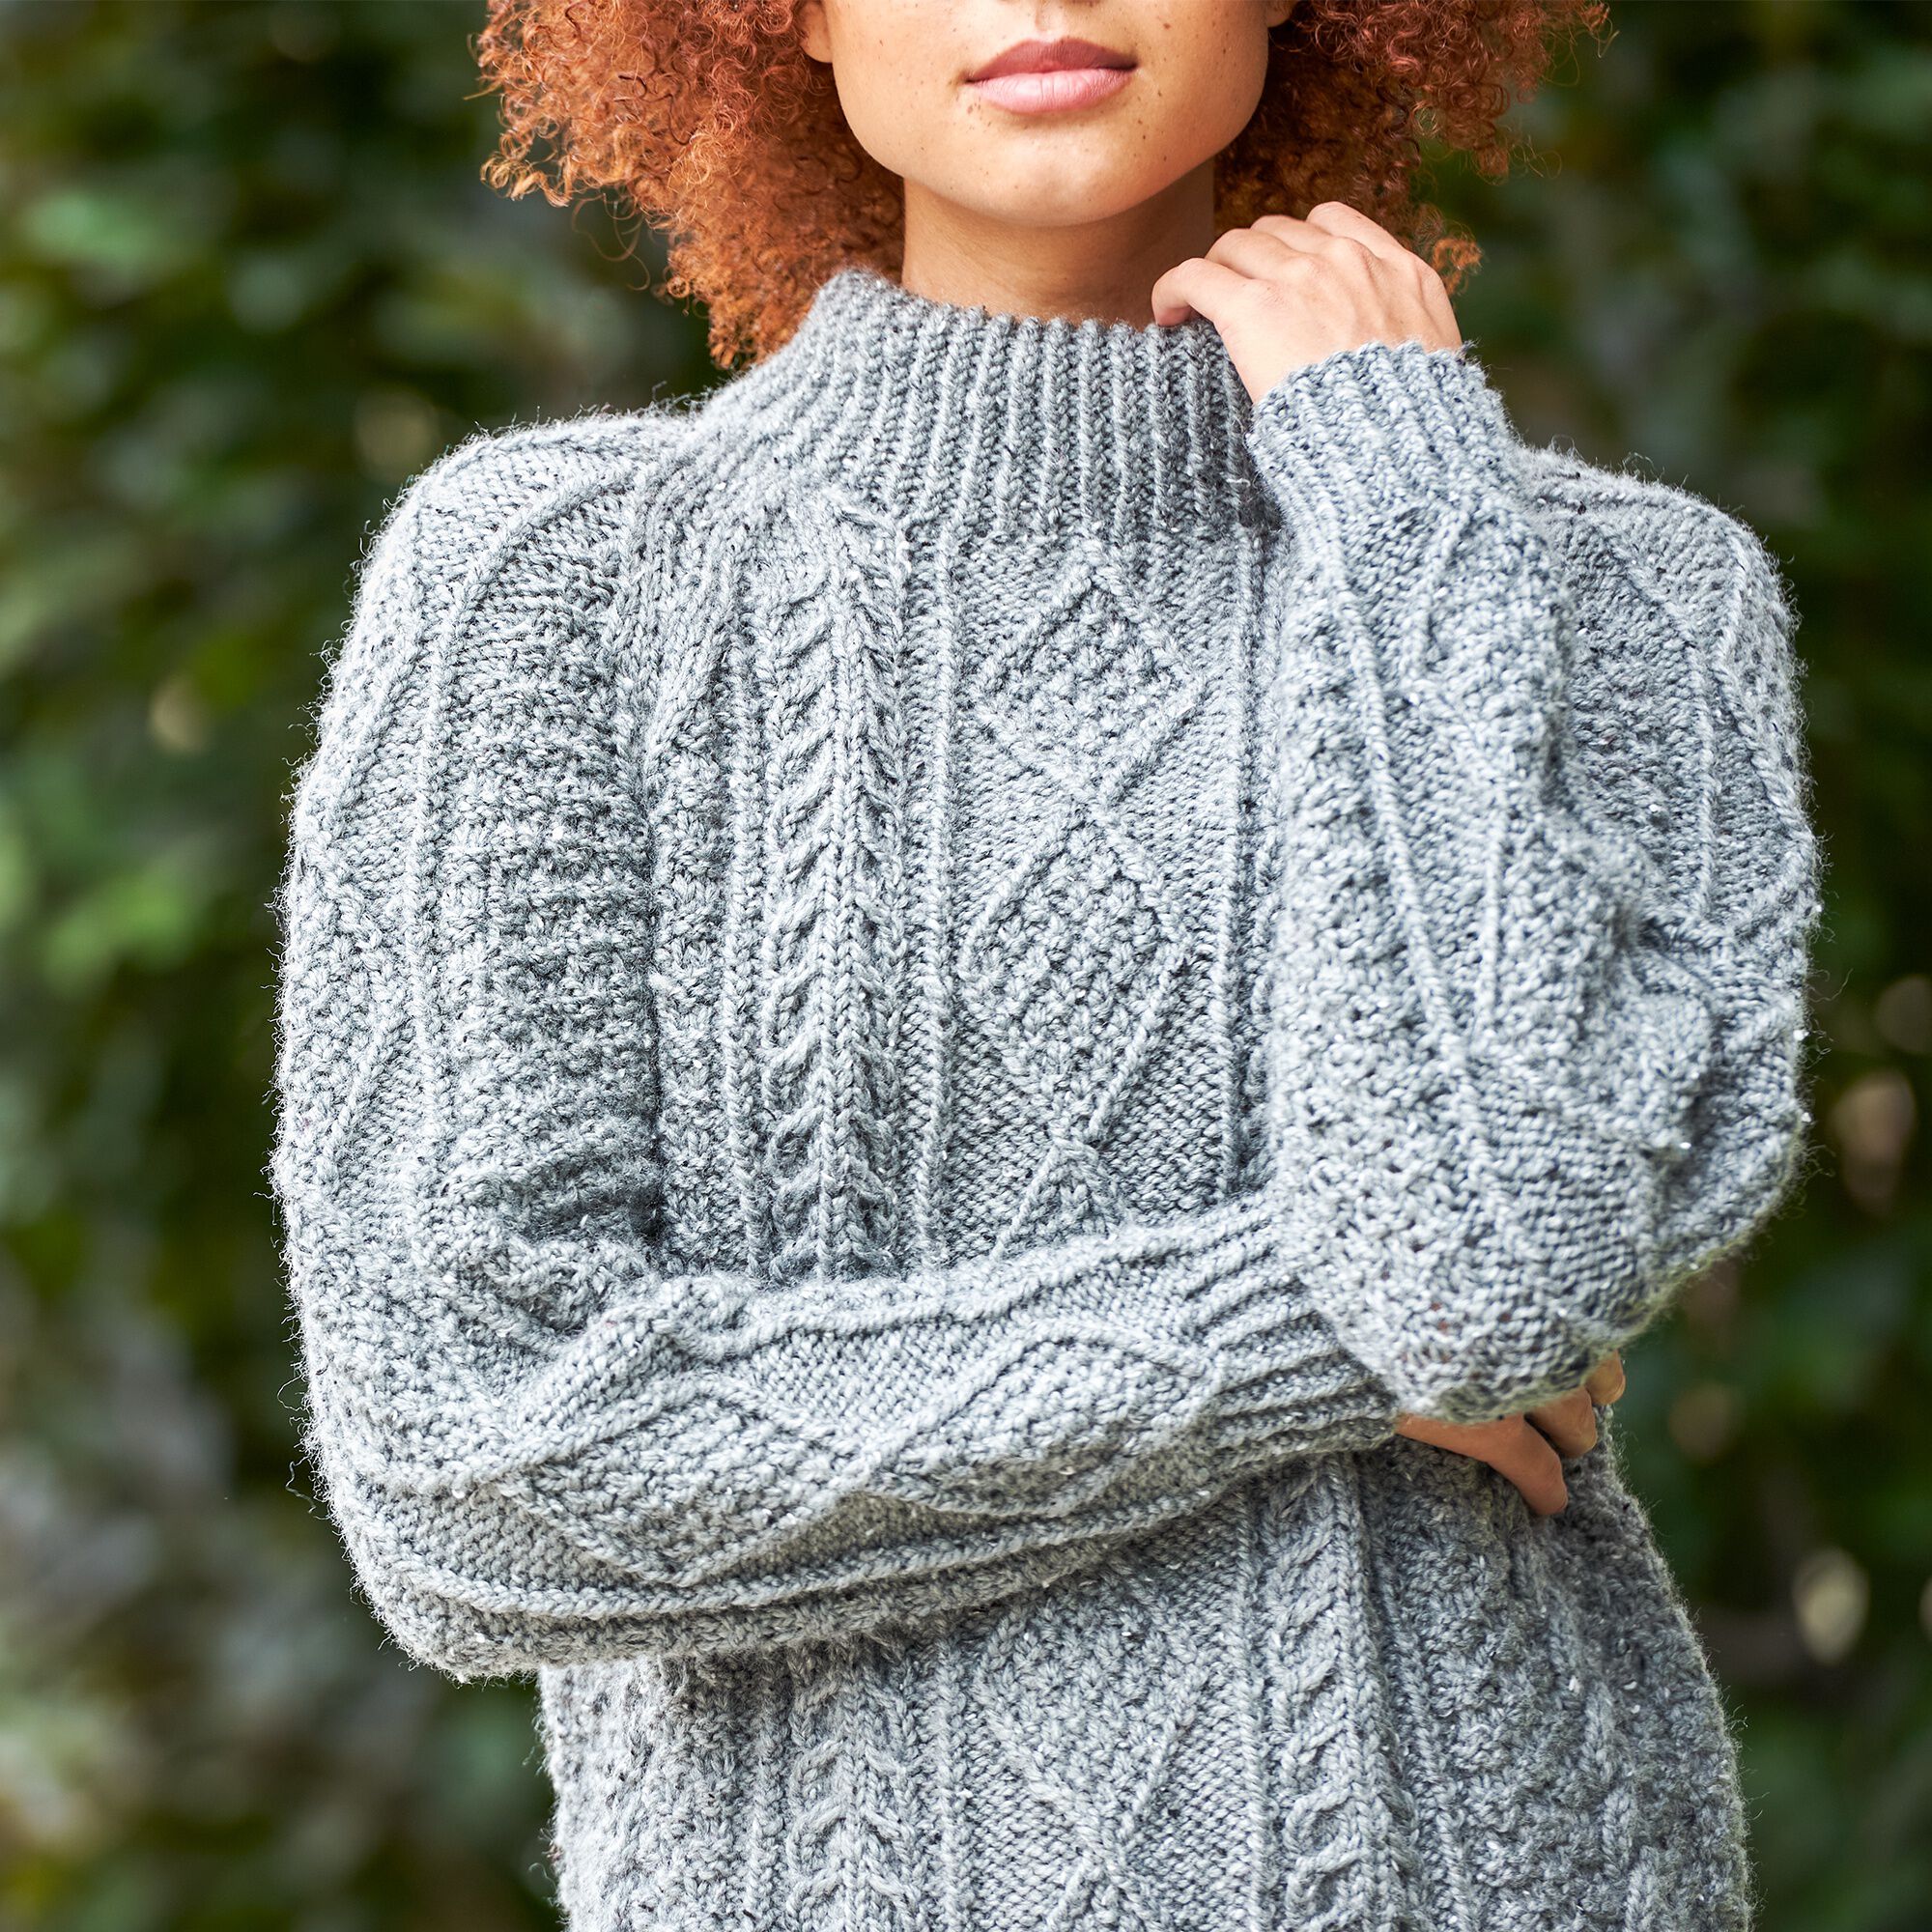 https://www.knitting-bee.com/wp-content/uploads/2020/09/Cable-Knit-Pattern-for-Women-Free.jpg